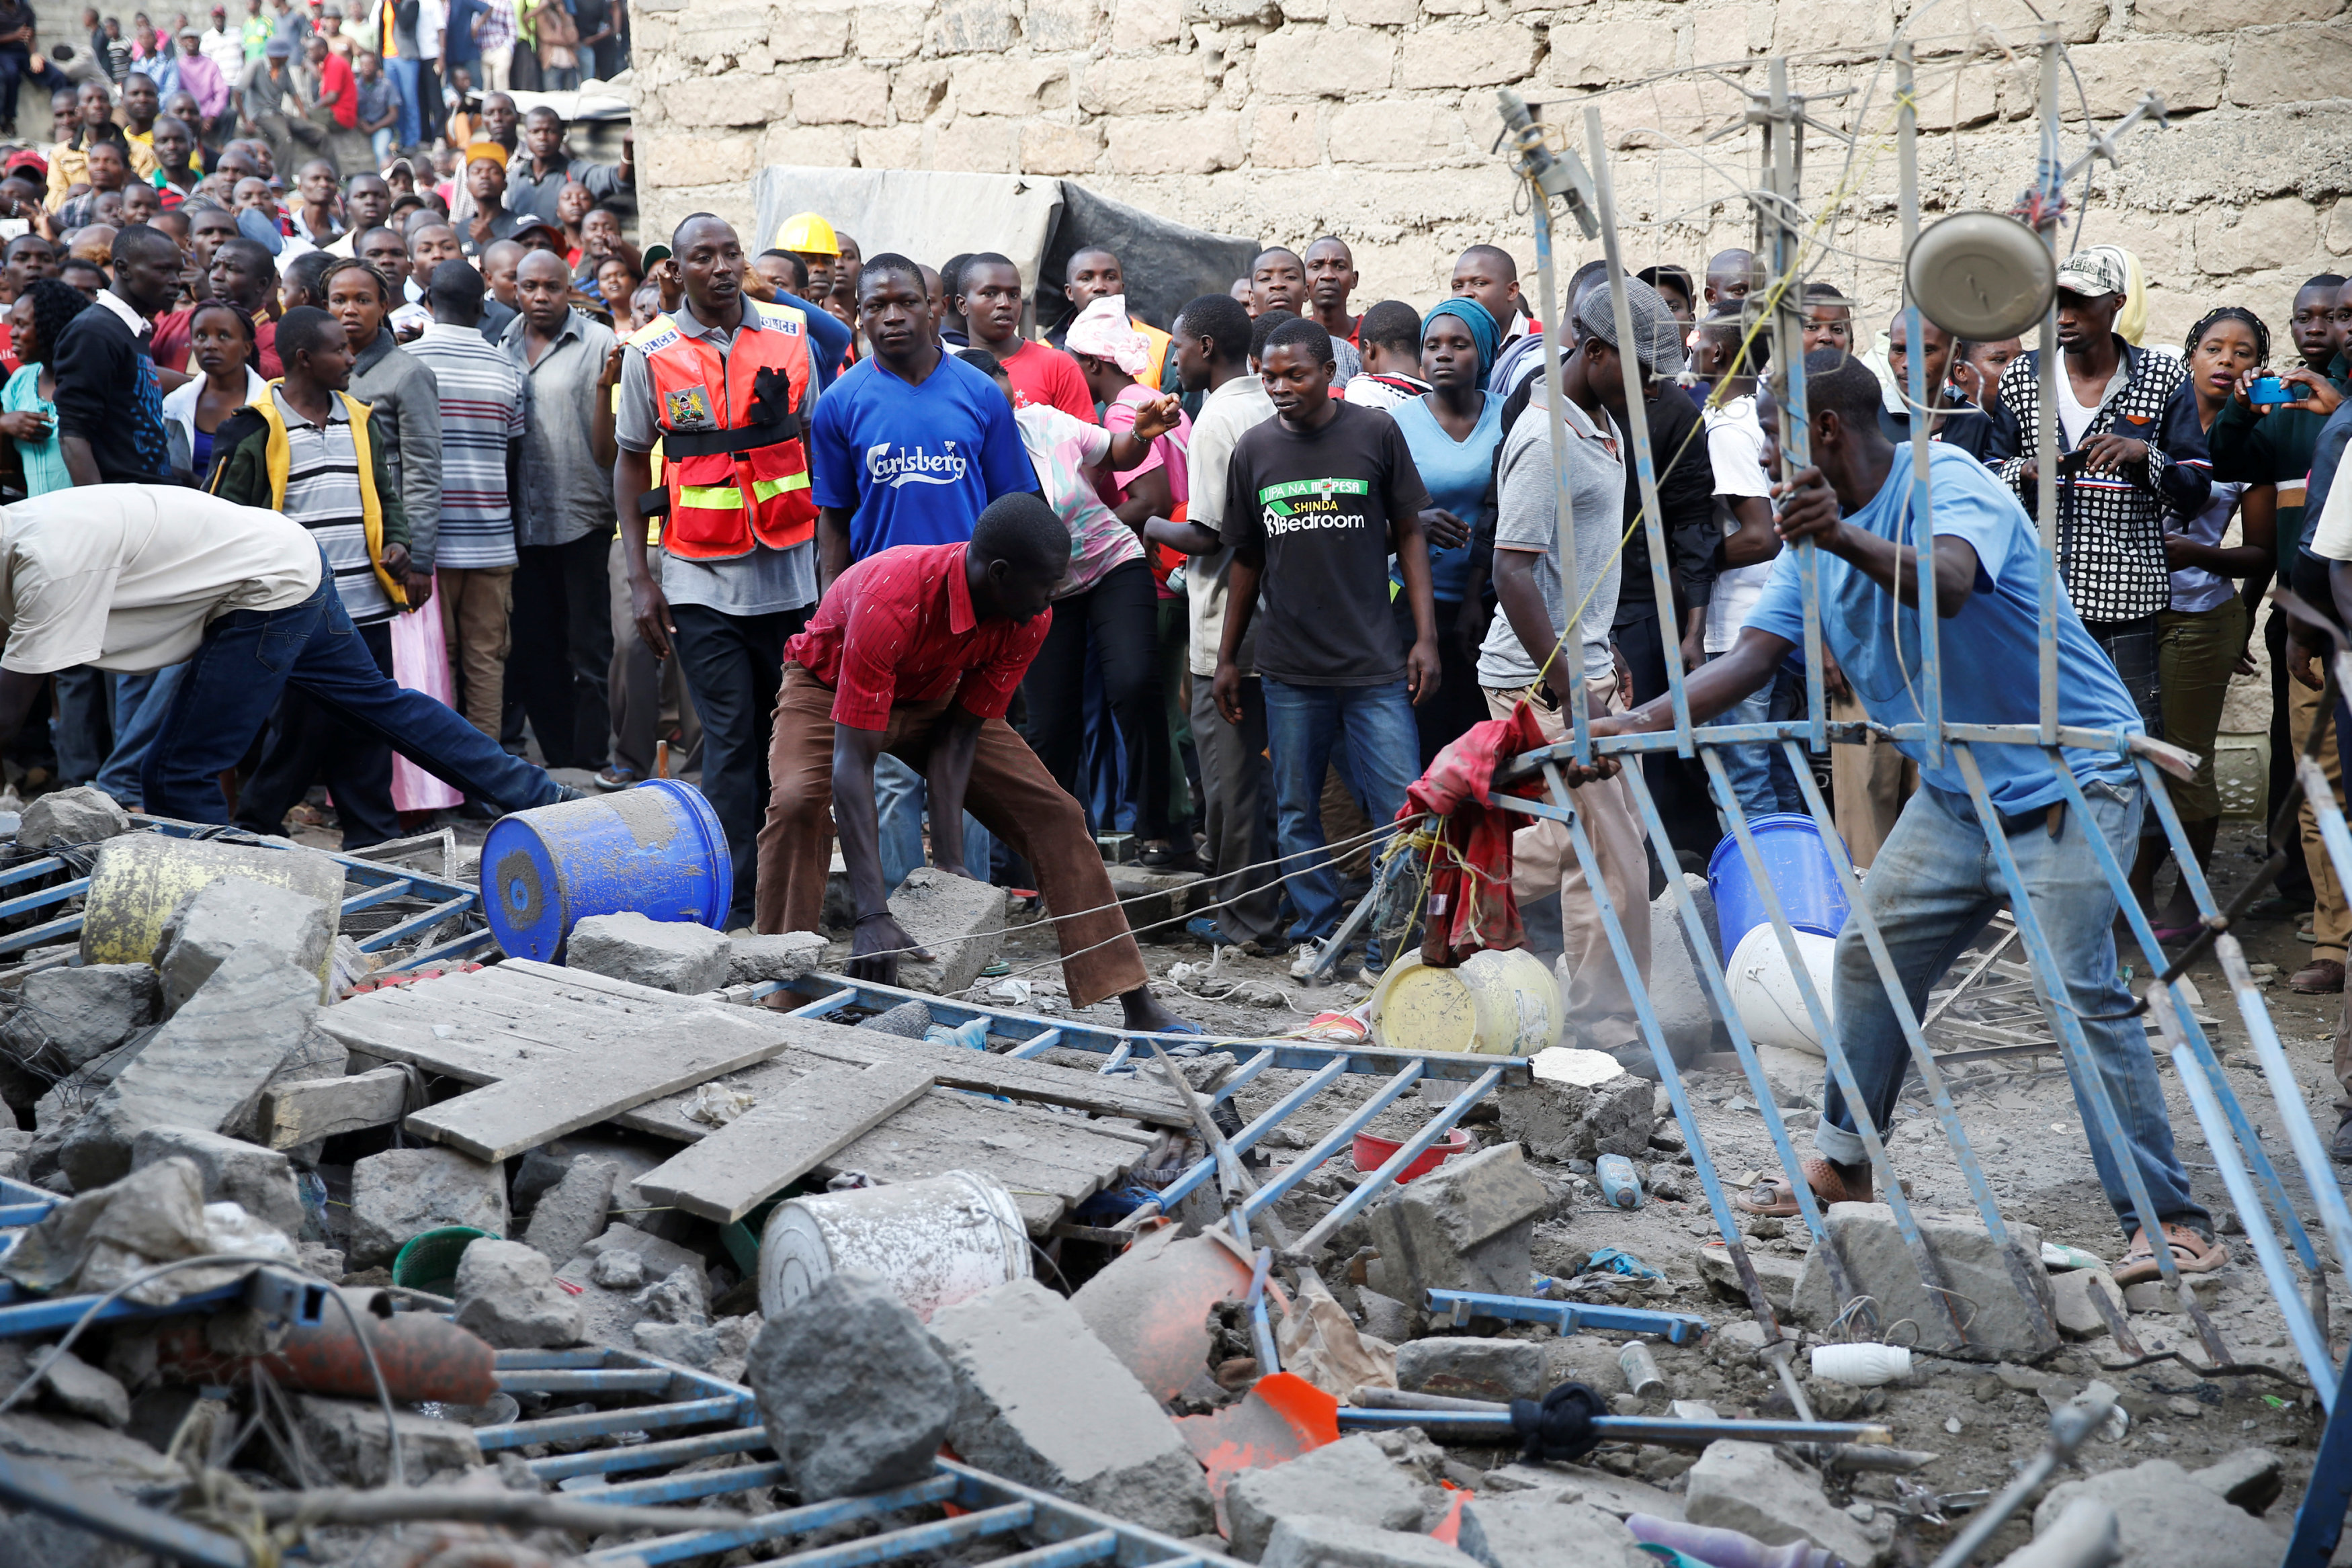 In pictures: Building collapses in Nairobi